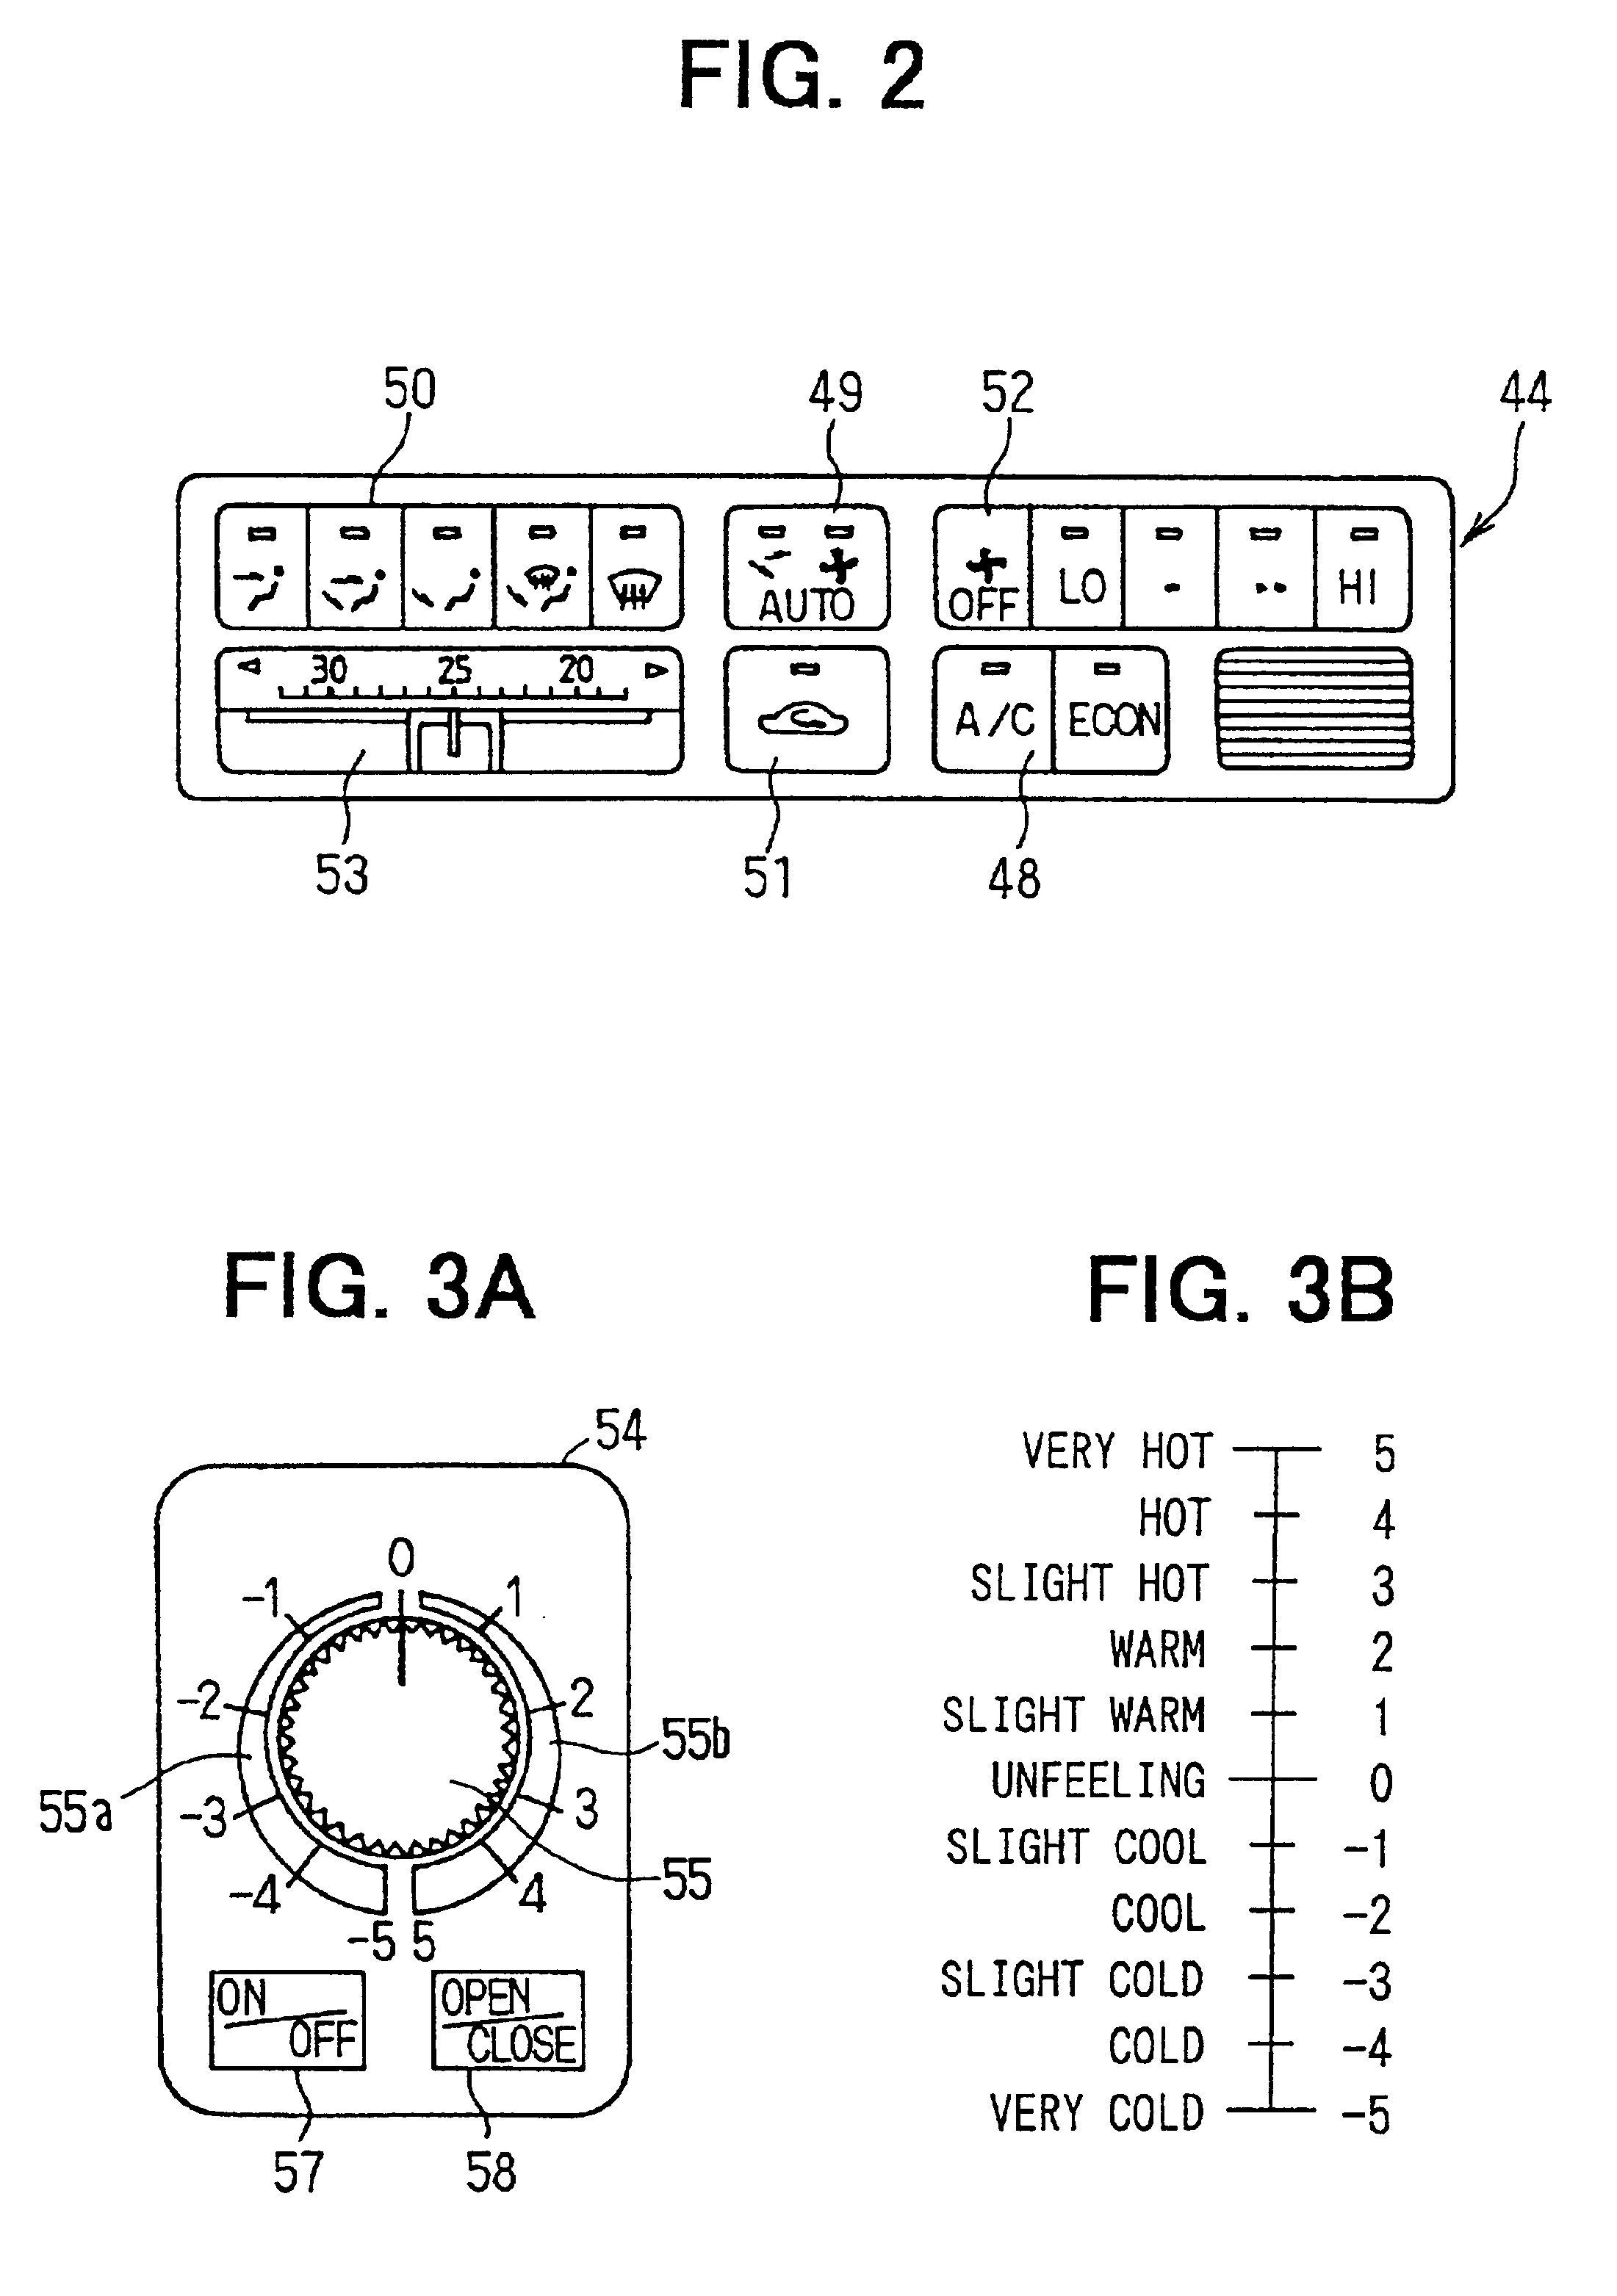 Vehicle air conditioning system with seat air conditioning unit